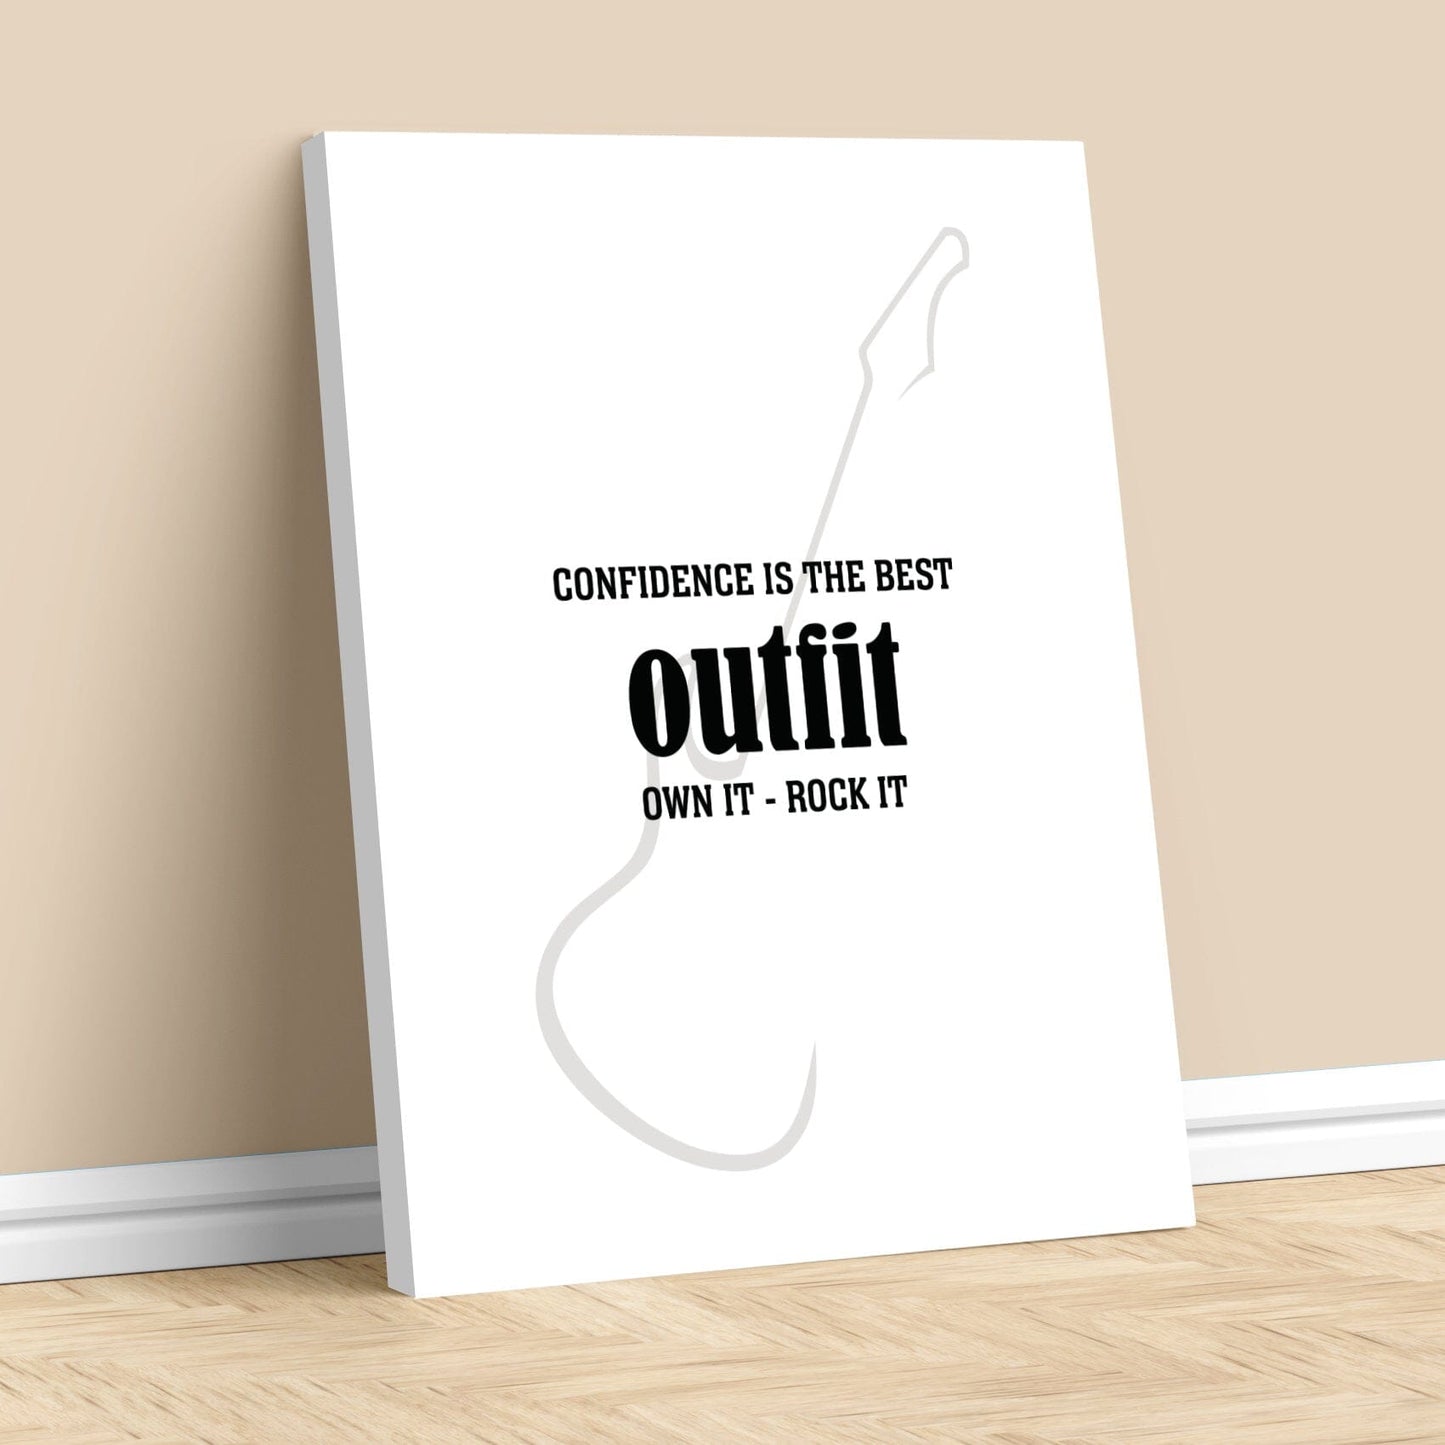 Wise & Witty Art - Confidence is the Best Outfit Own It Rock It Wise and Wiseass Quotes Song Lyrics Art 11x14 Canvas Wrap 